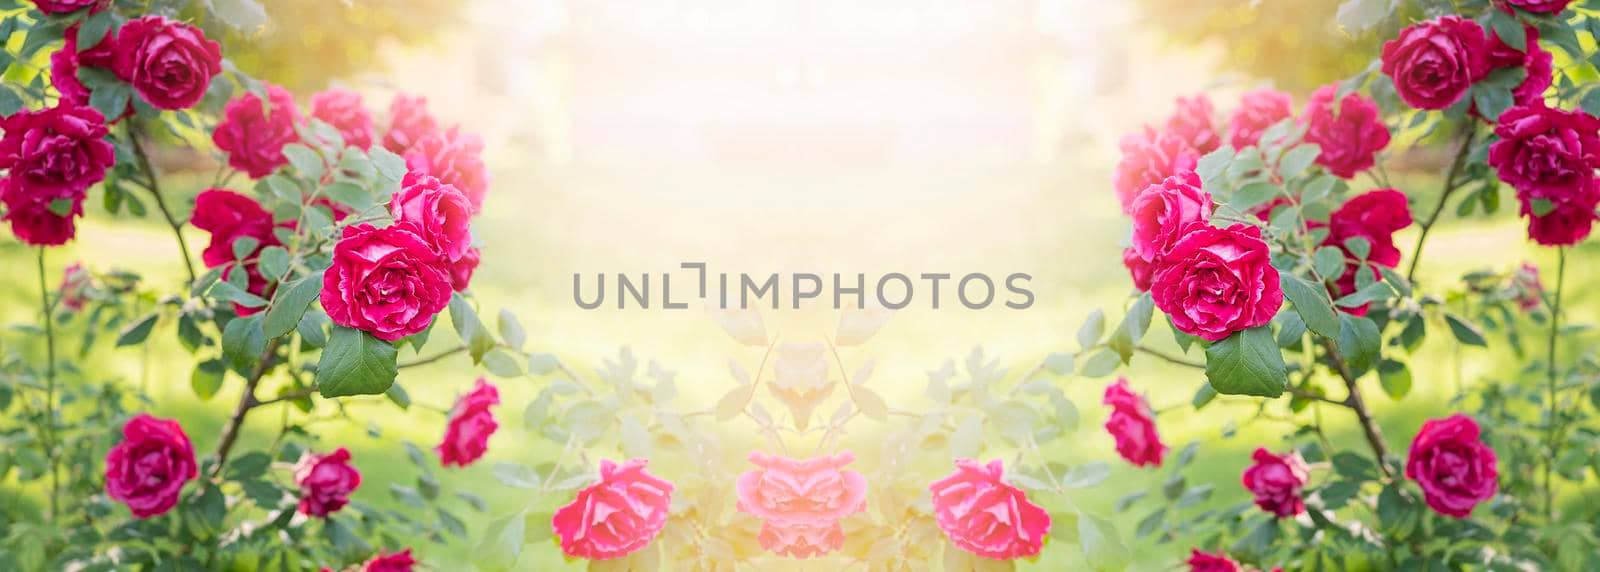 Bush pink Roses in the garden in the rays of the sun with copy space, banner